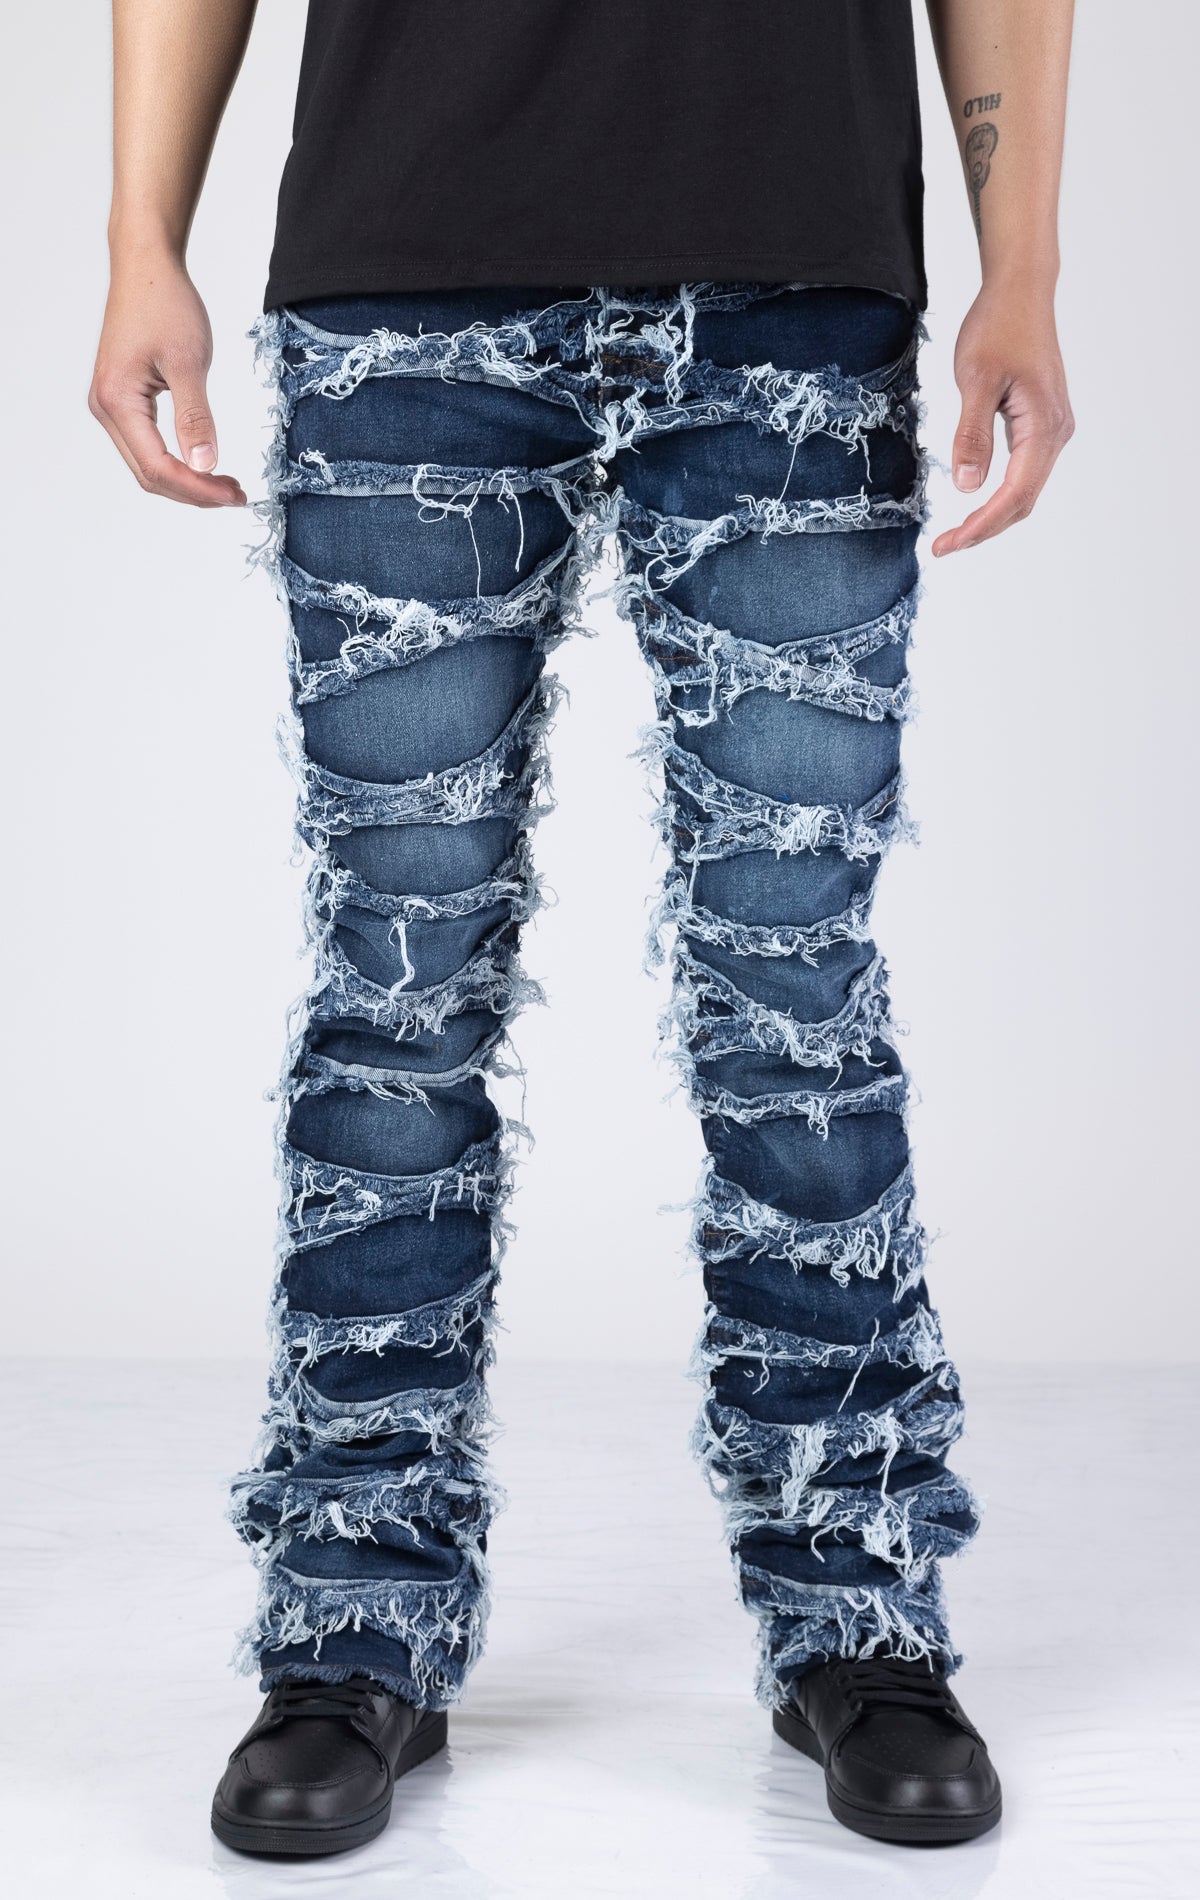 Blue  jeans with frayed detailing at the hems for a distressed look. Made with stretch denim for a comfortable fit. 98% cotton, 2% spandex.